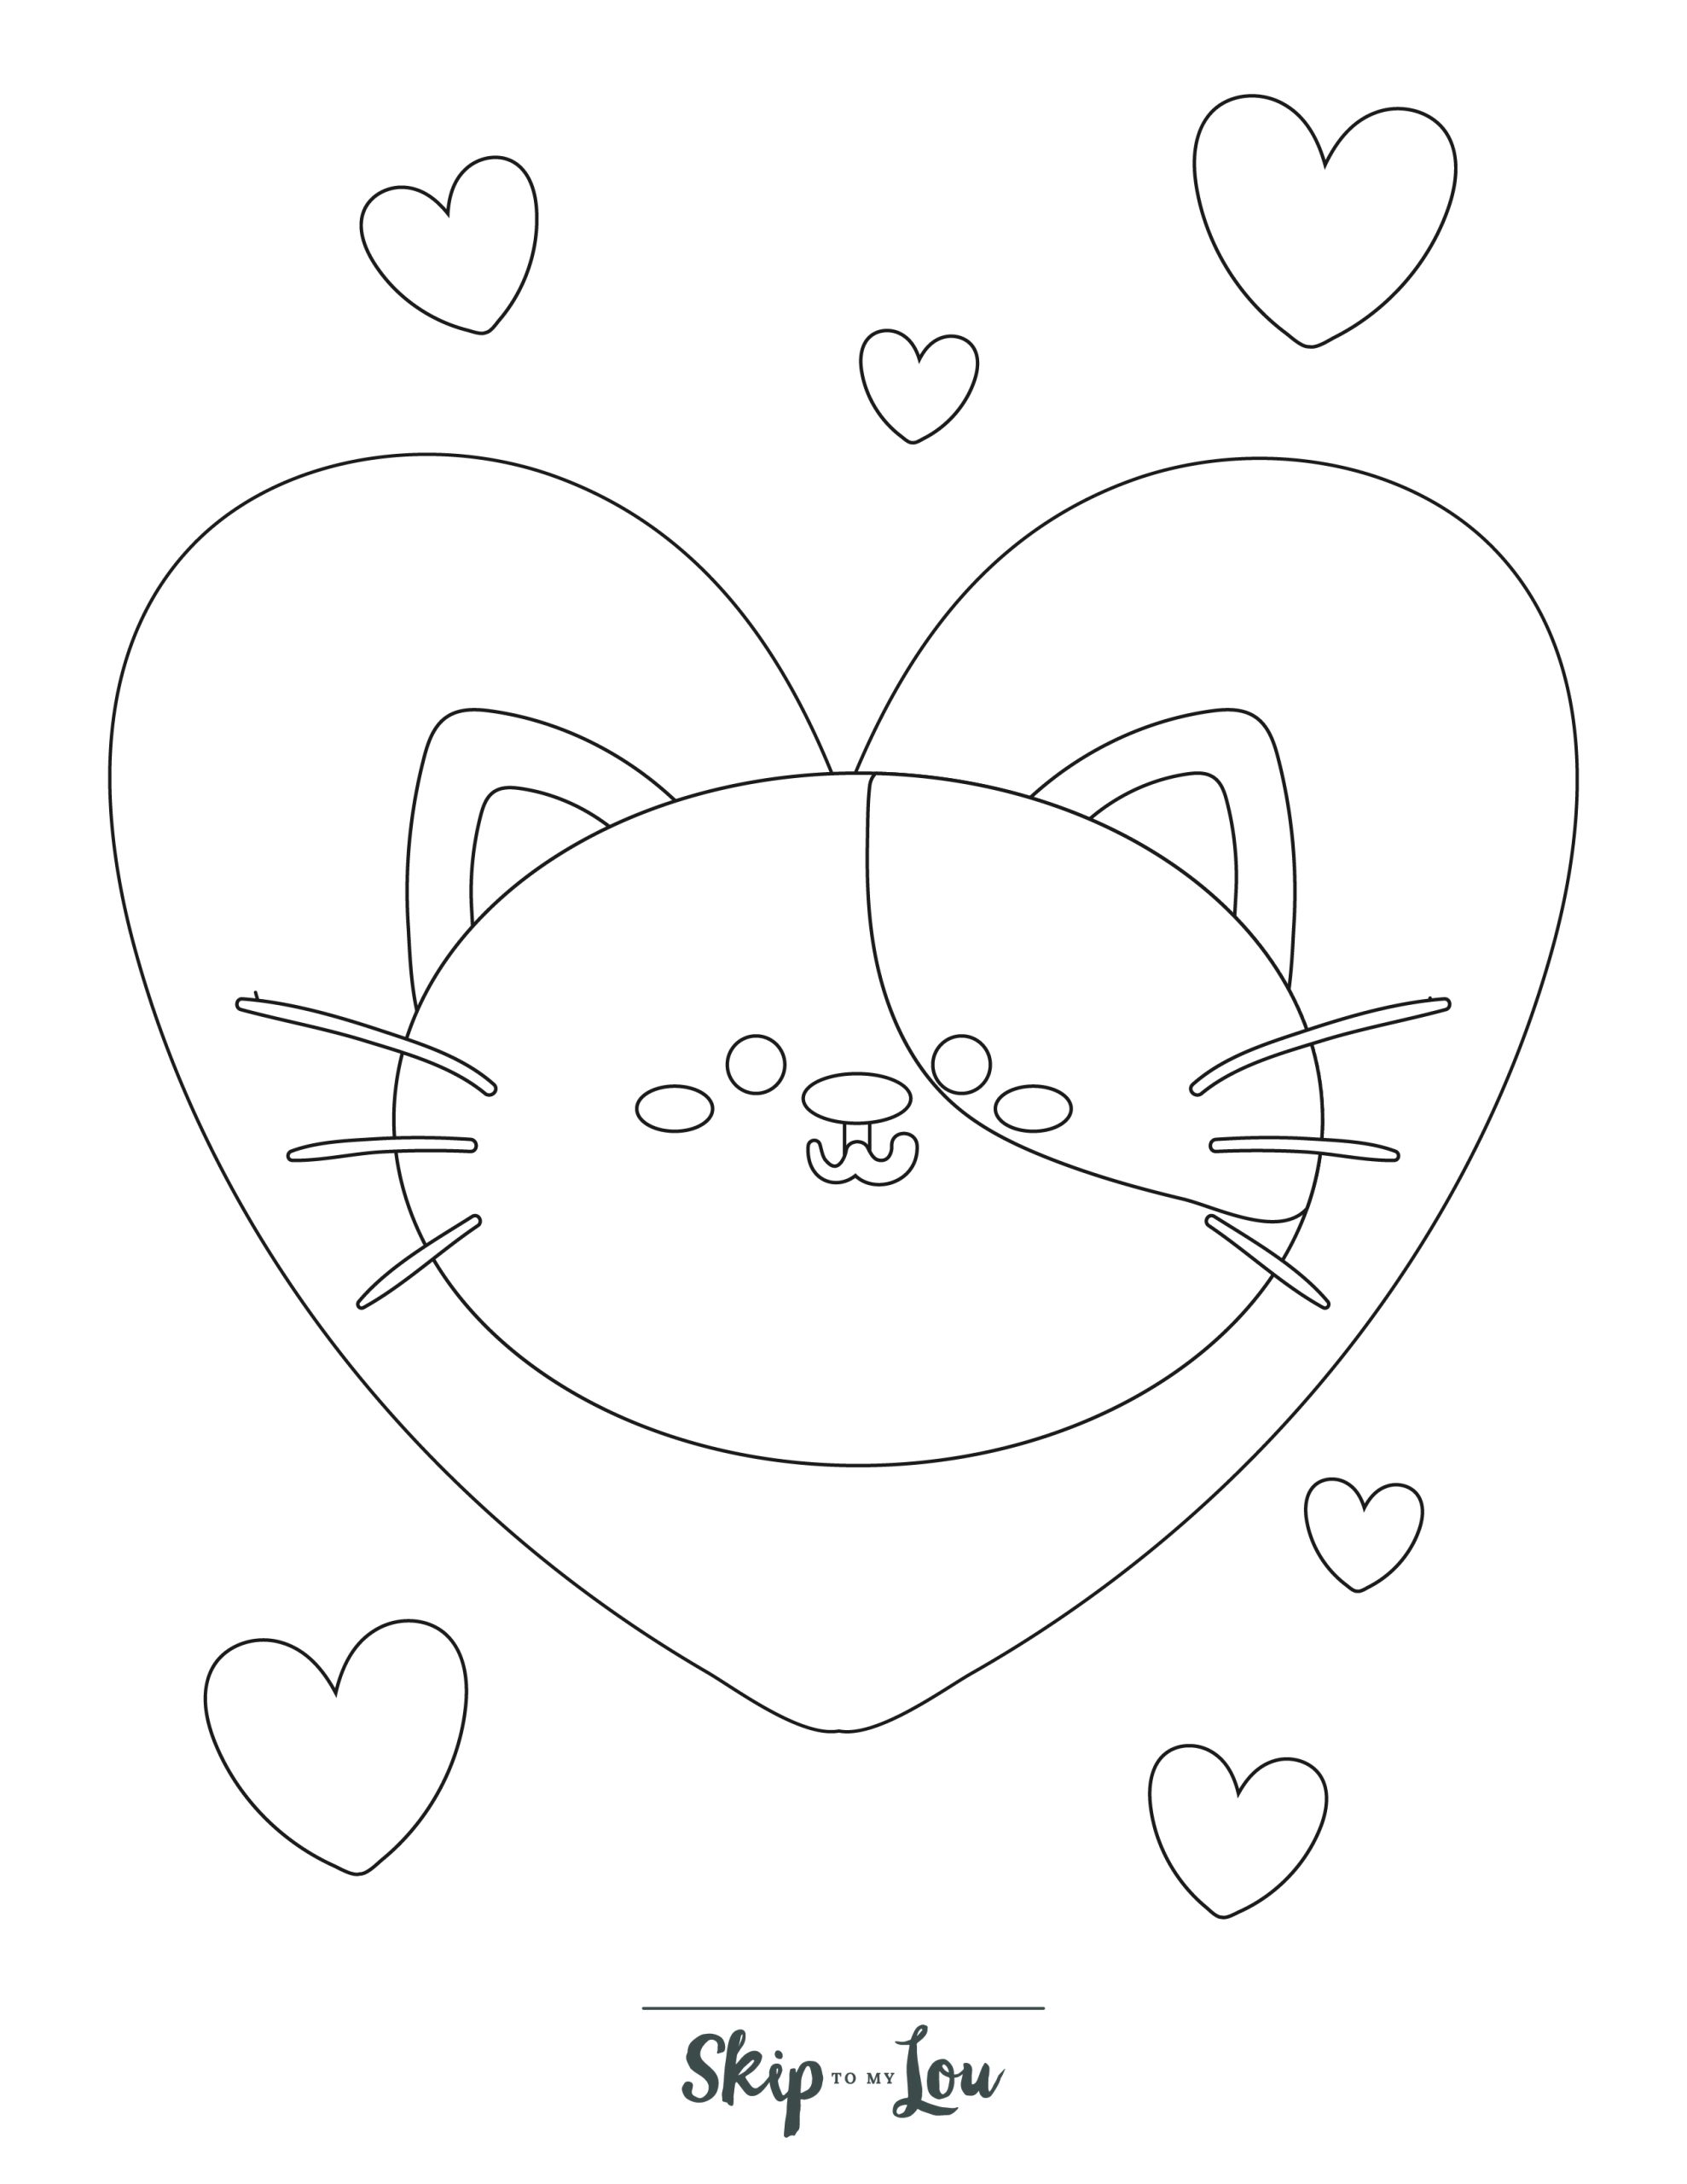 Preschool Coloring Page 5 - Simple line drawing of a cat's face with hearts in the background